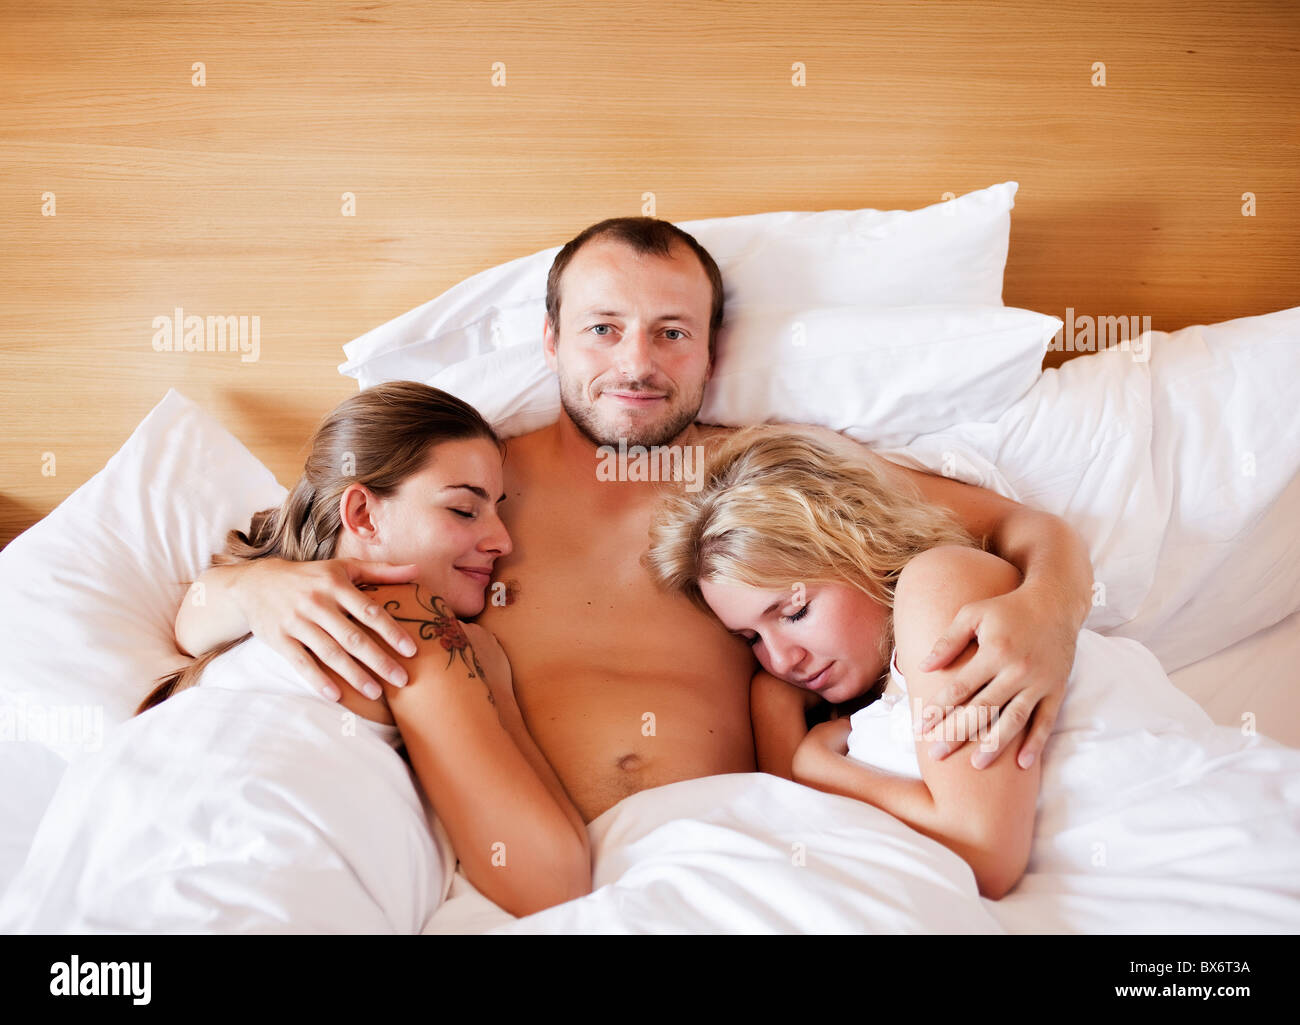 marriage, marital triangle, man, woman, women, bed, sex Stock Photo image